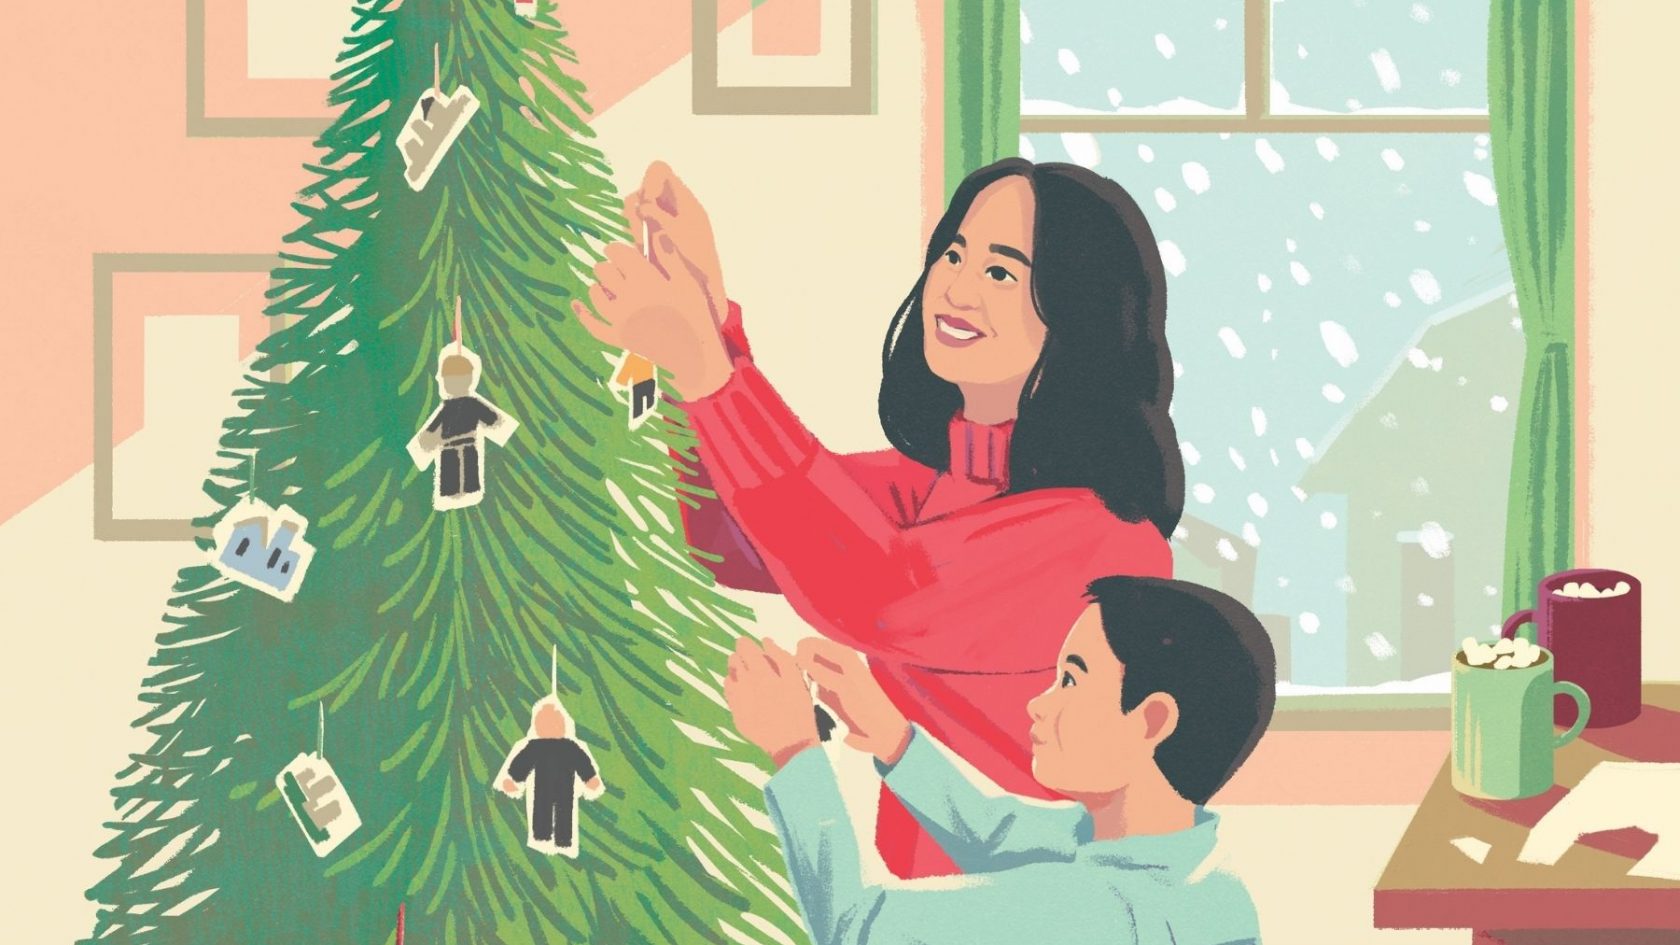 an illustration shows a young boy and older girl put ornaments on Christmas tree. Hot chocolate sits on a table nearby.